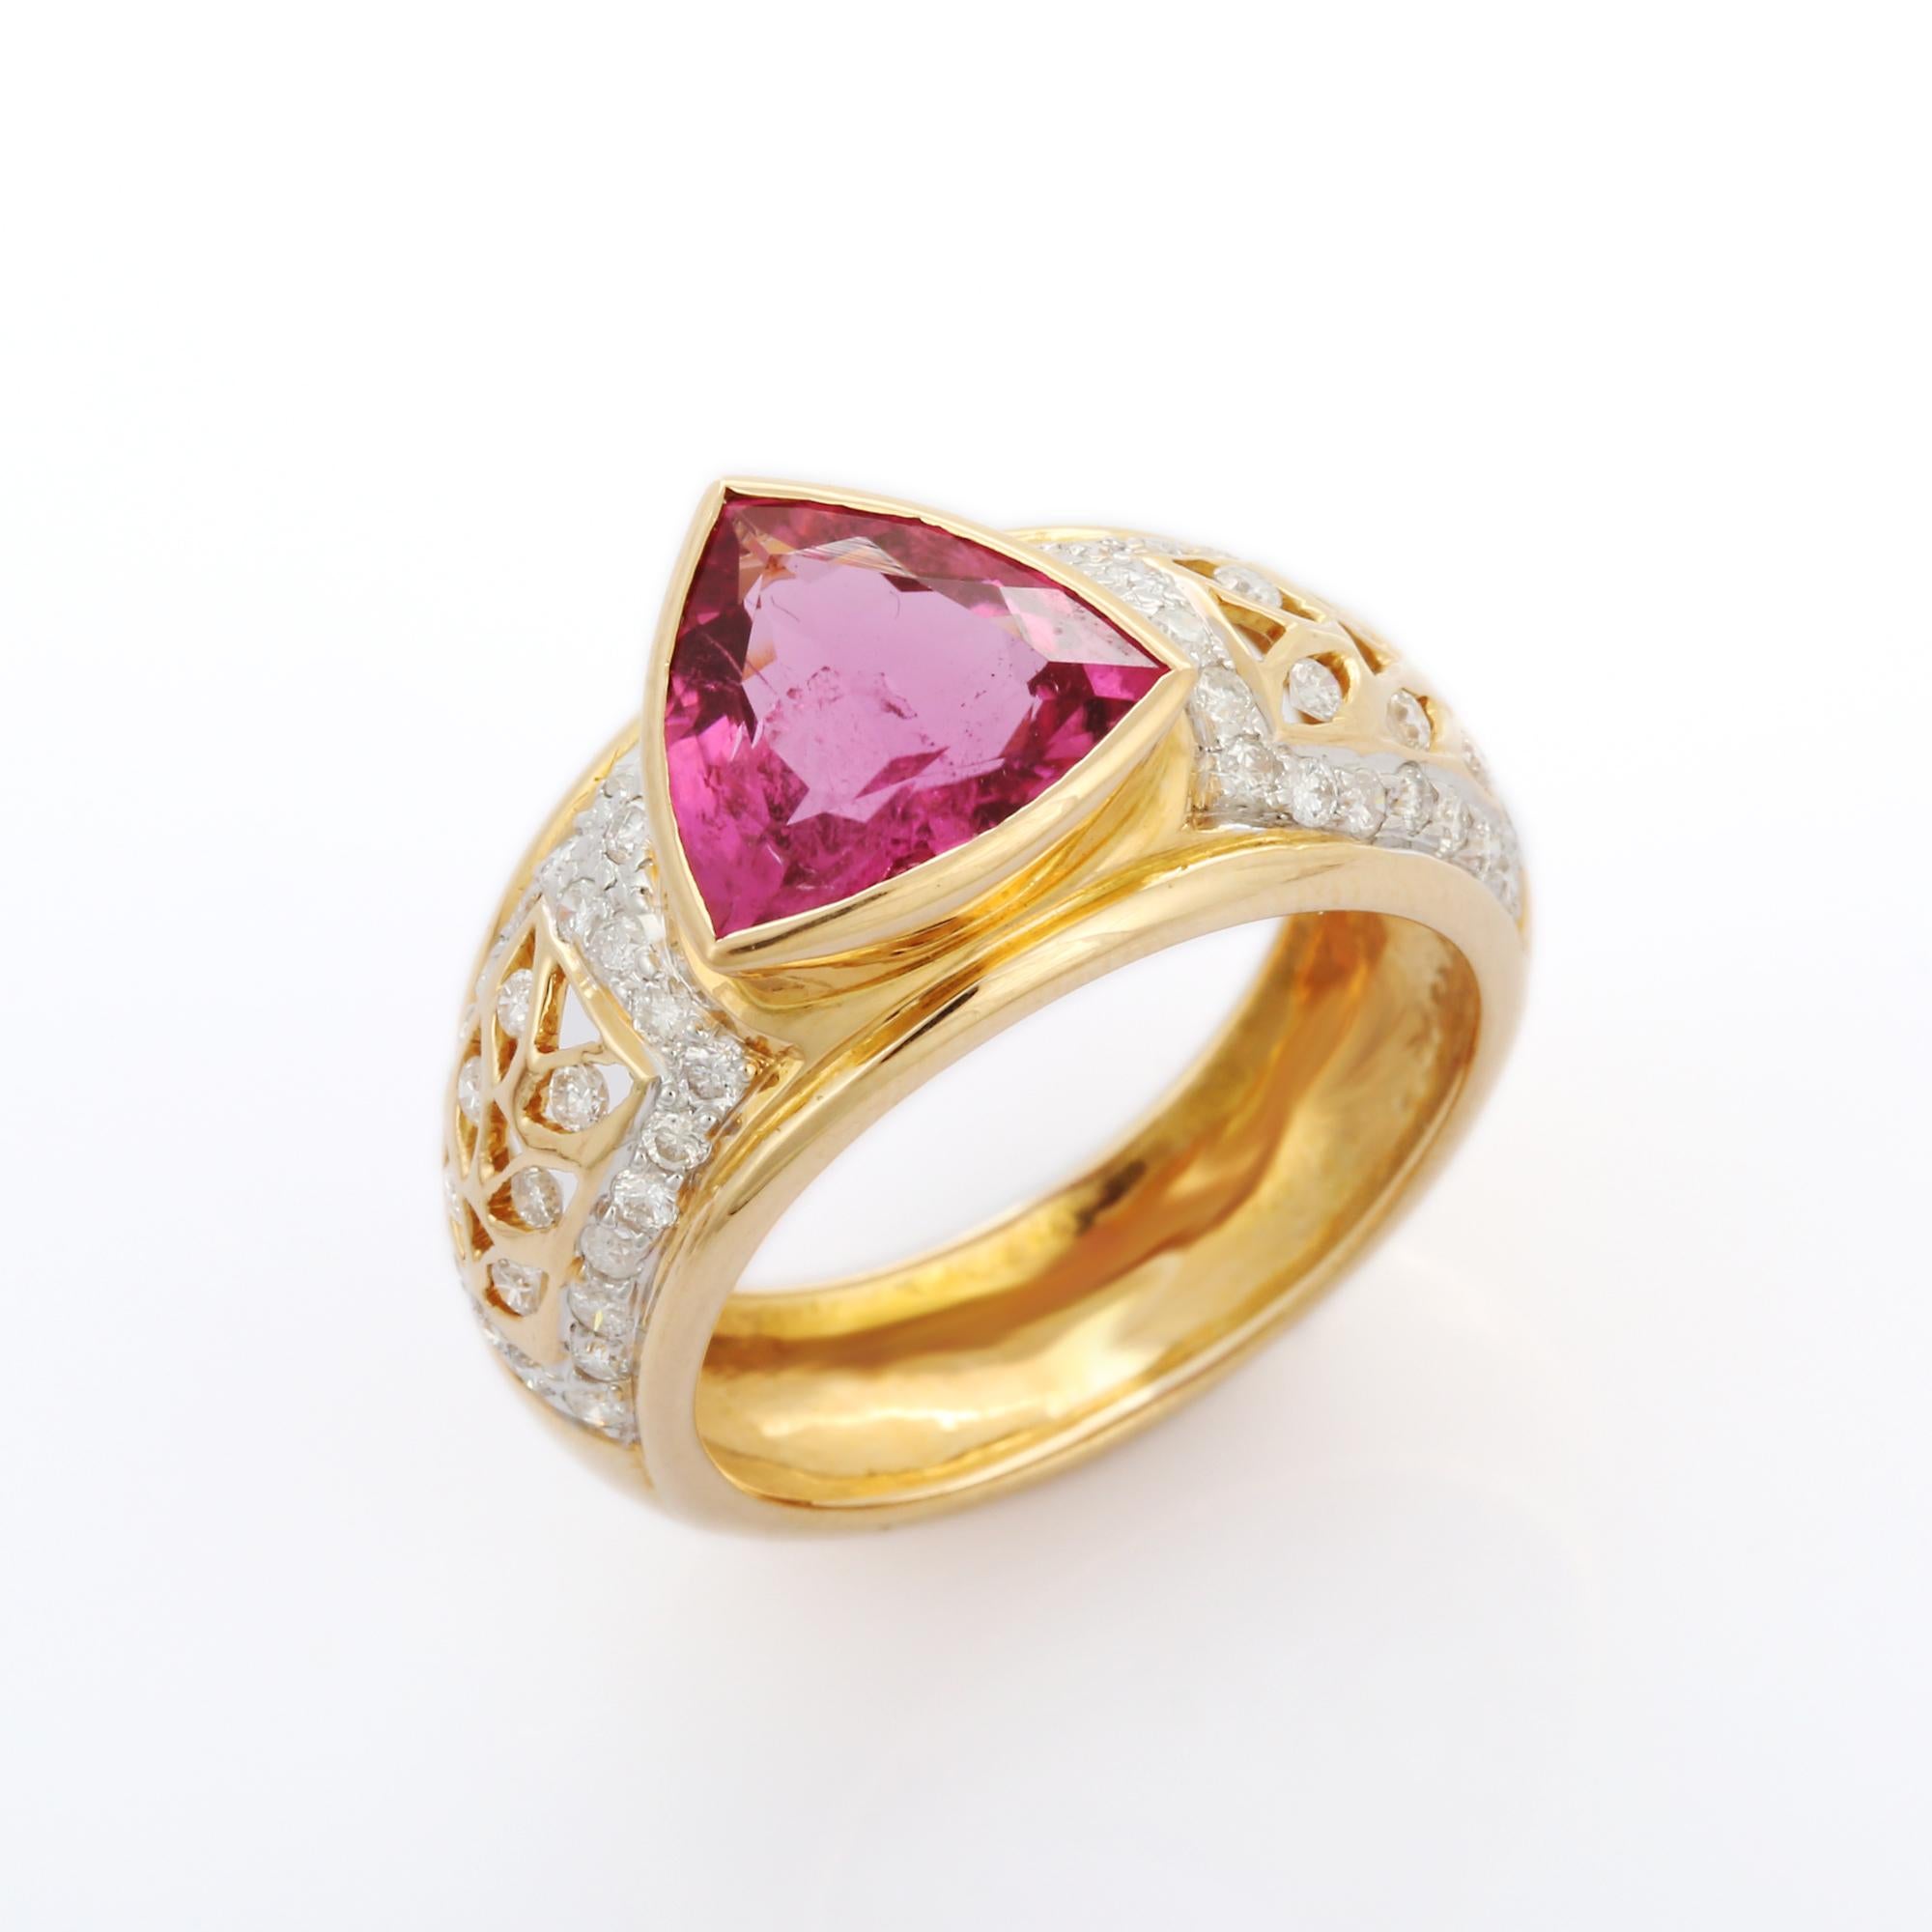 For Sale:  2.81 Carat Trillion cut Ruby Diamond Bridal Ring in 18K Yellow Gold  7